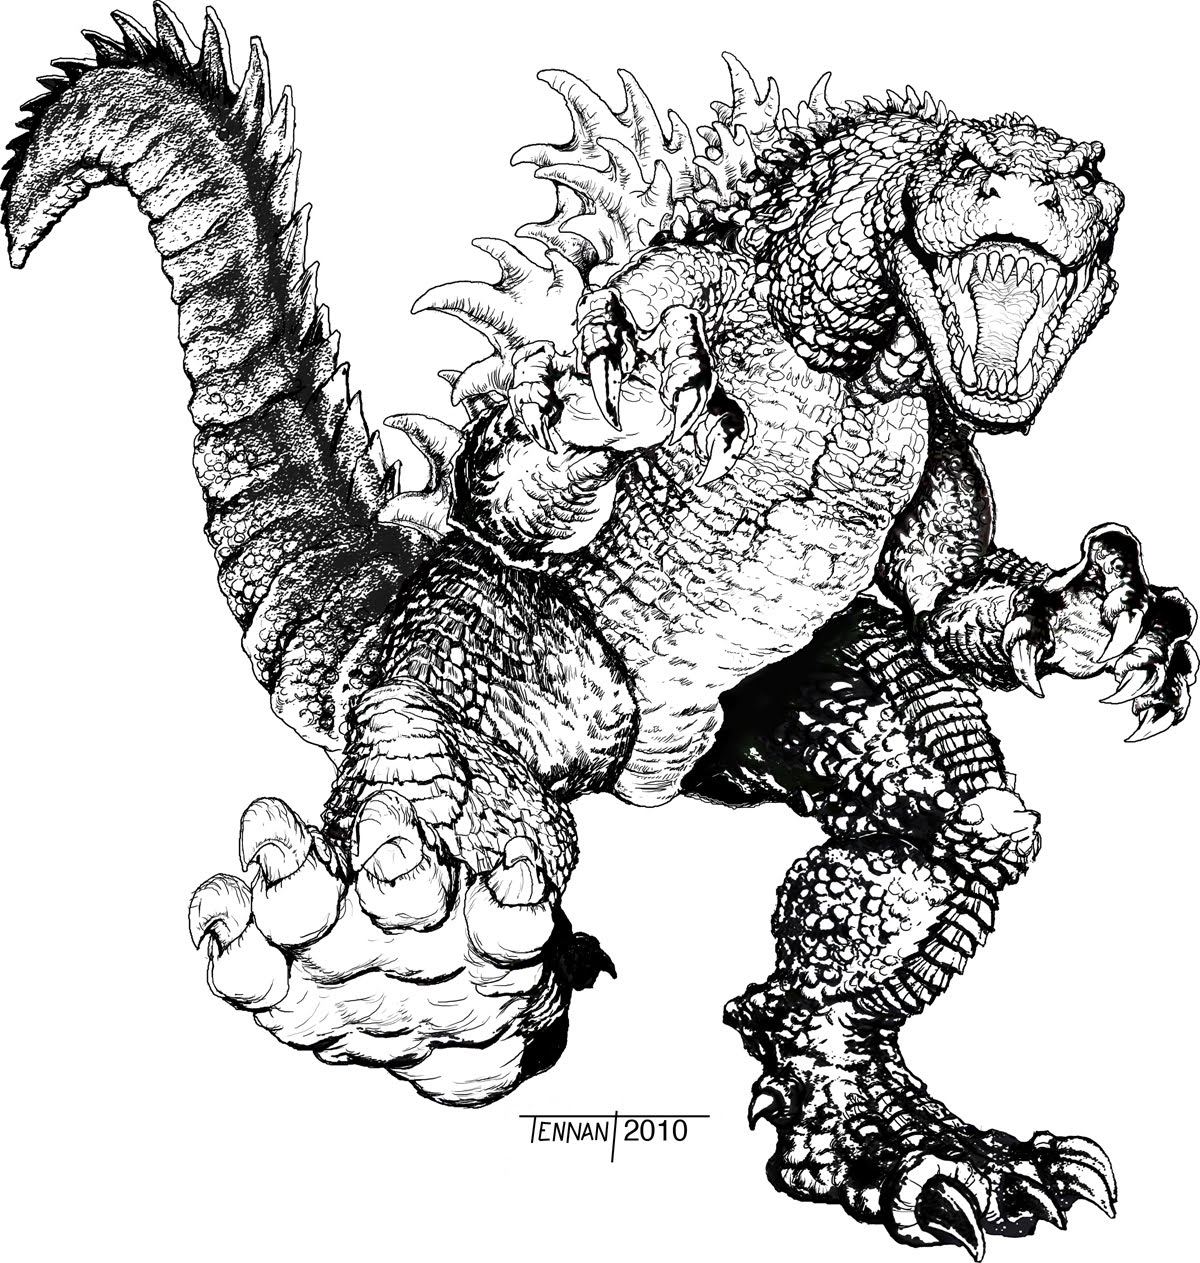 godzilla coloring pages coloring home